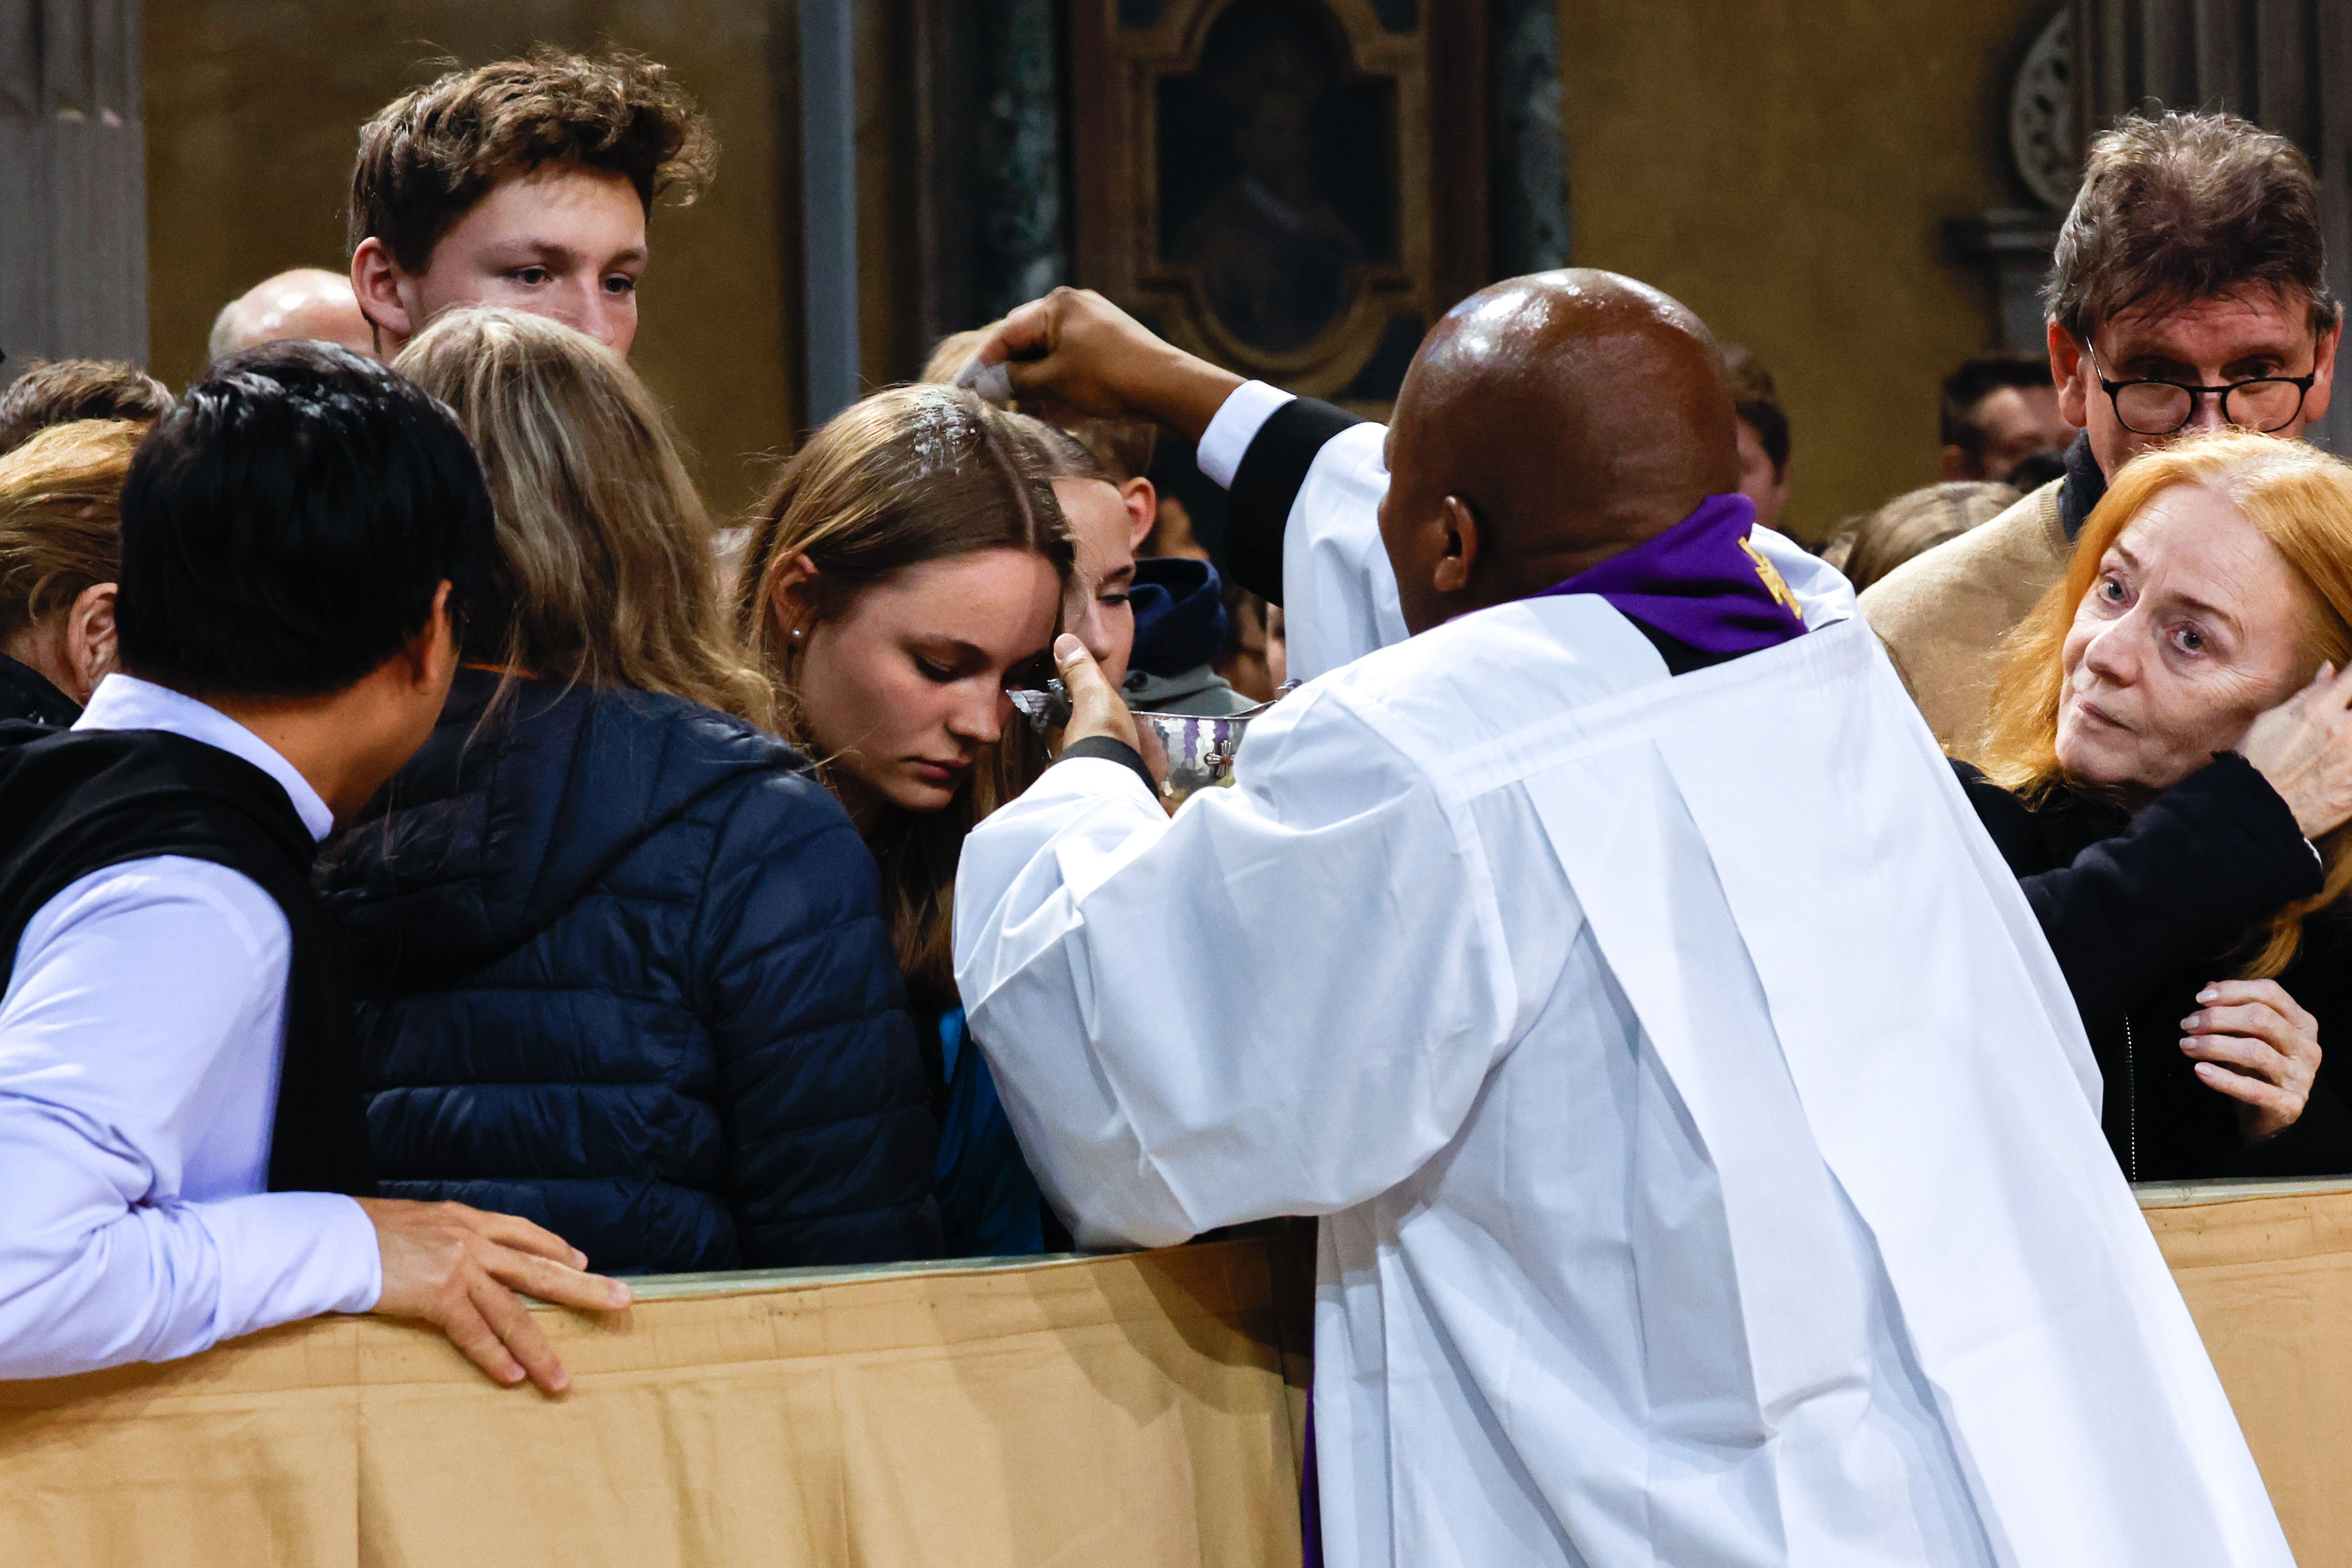 A priest administers ashes.